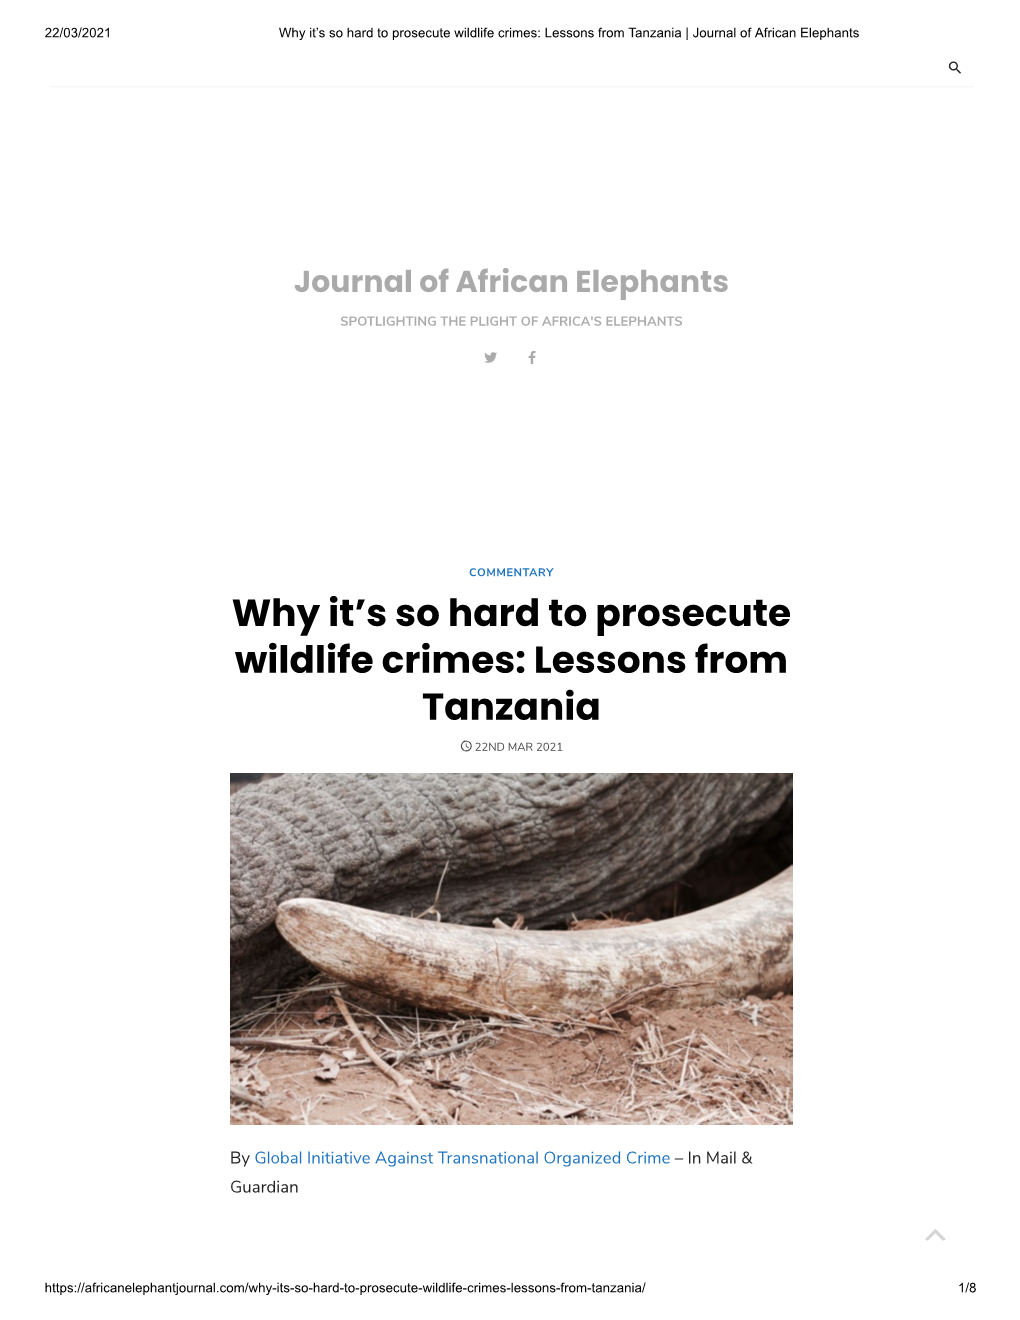 Why It's So Hard to Prosecute Wildlife Crimes: Lessons from Tanzania